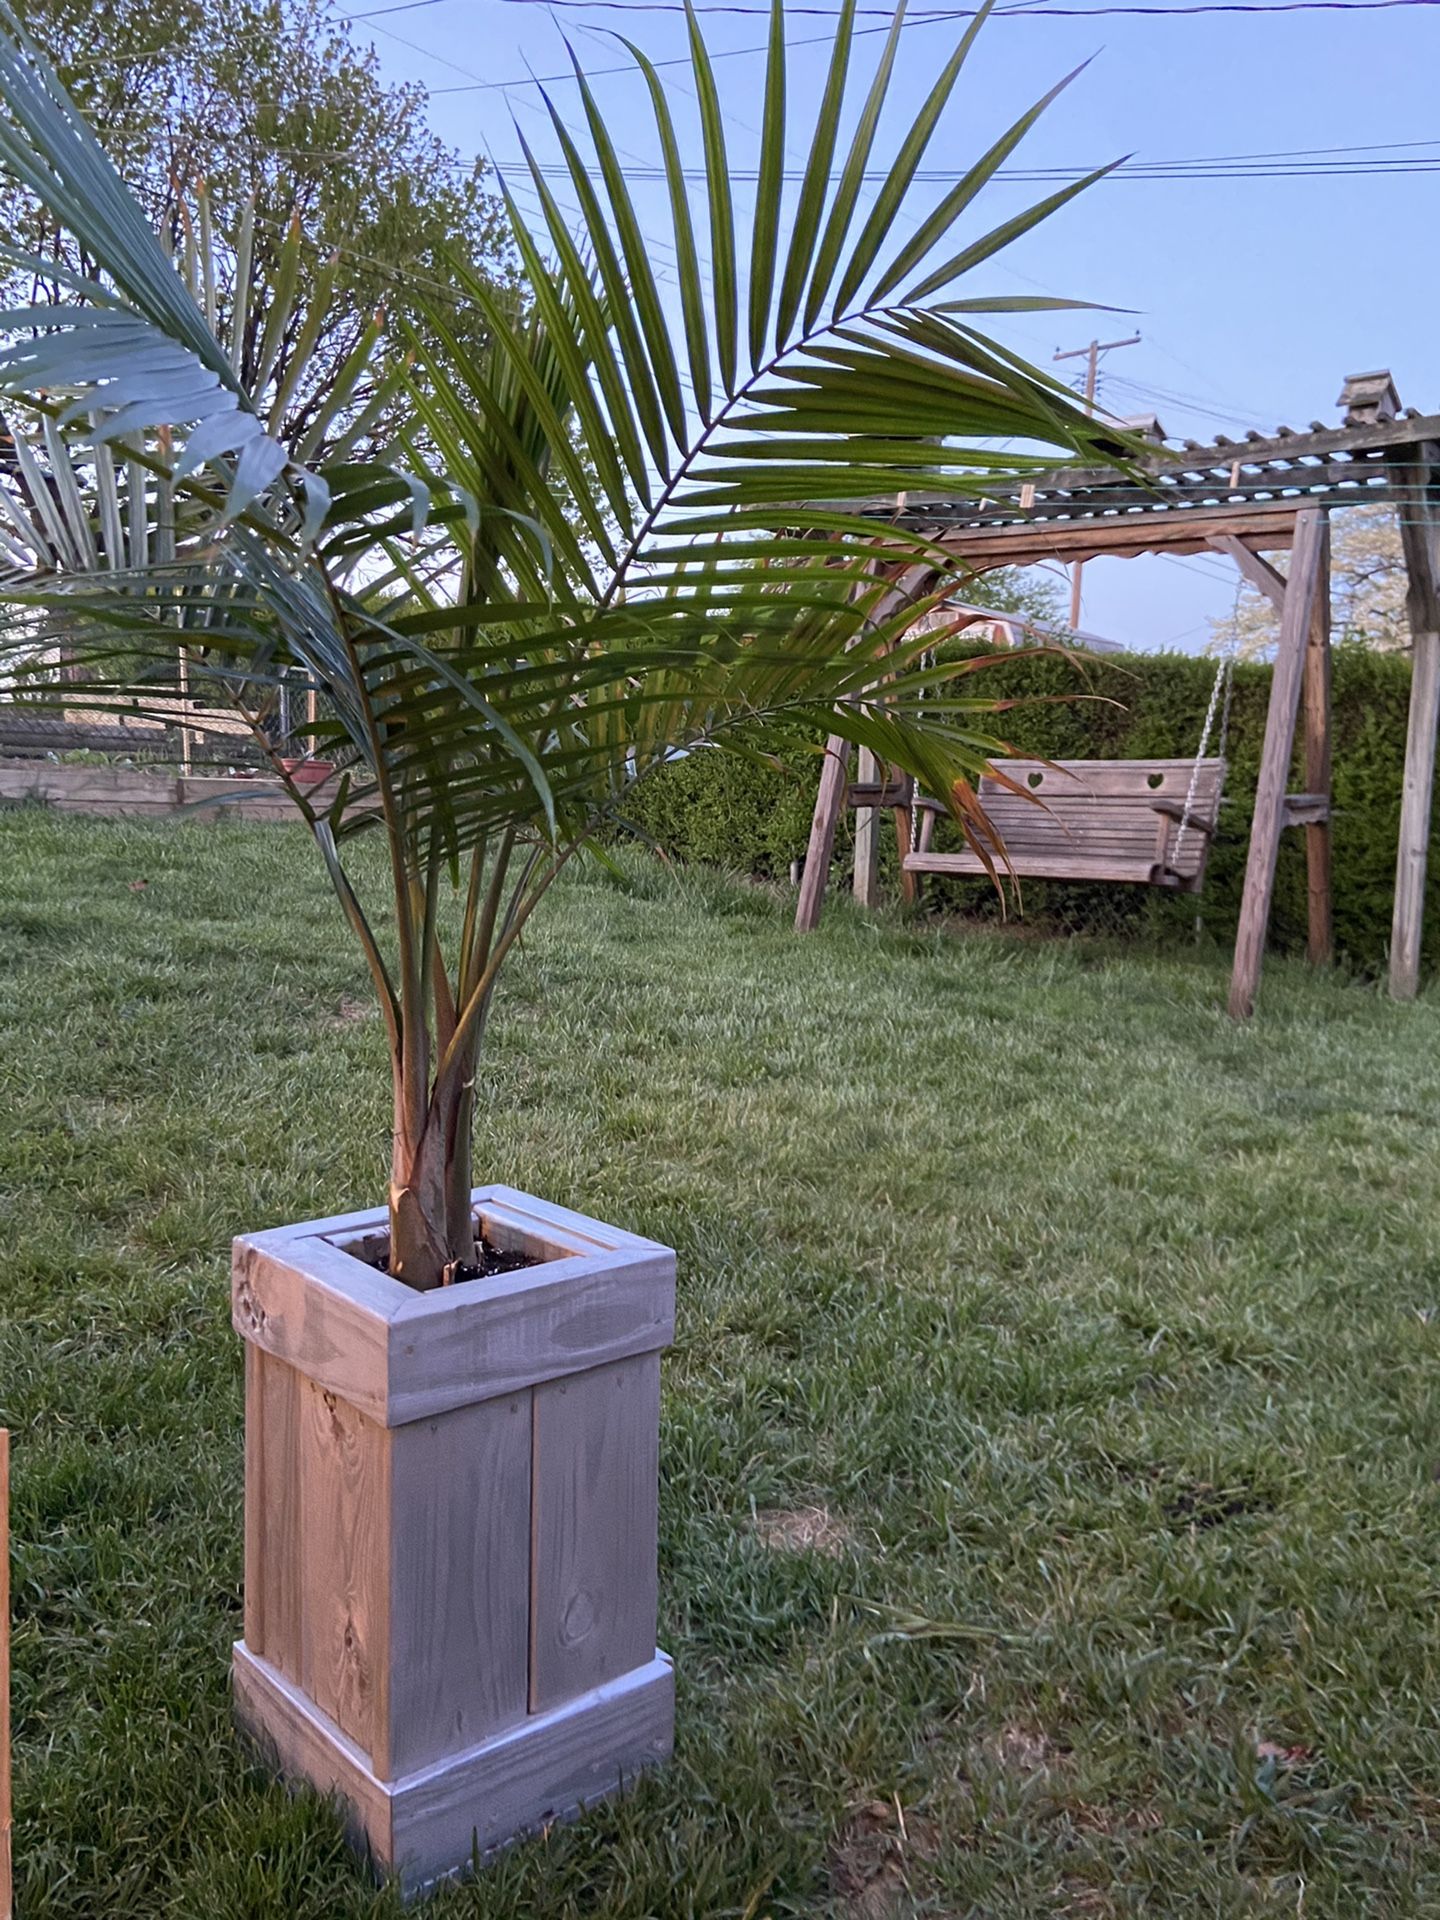 Planter and palm